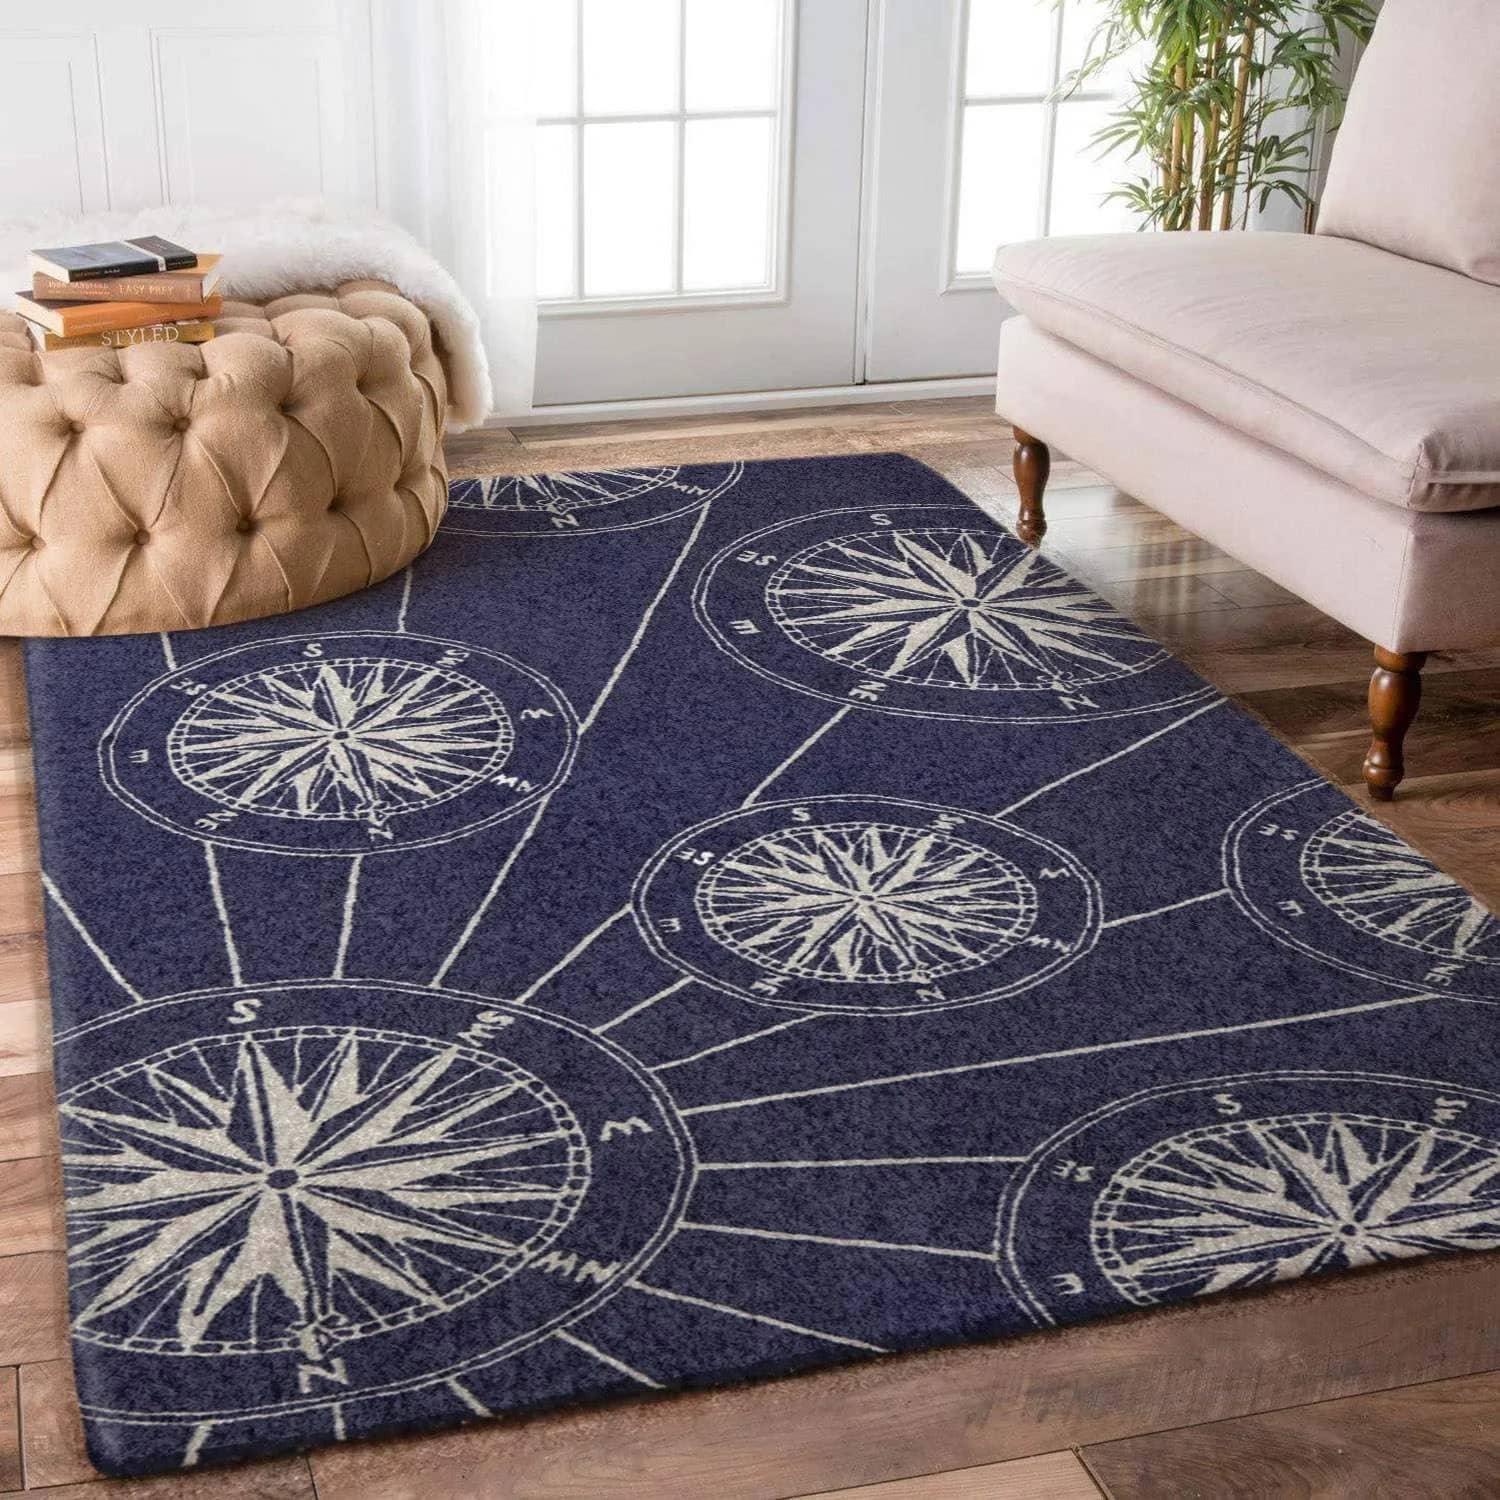 Compass Limited Edition Amazon Best Seller Sku 262111 Rug